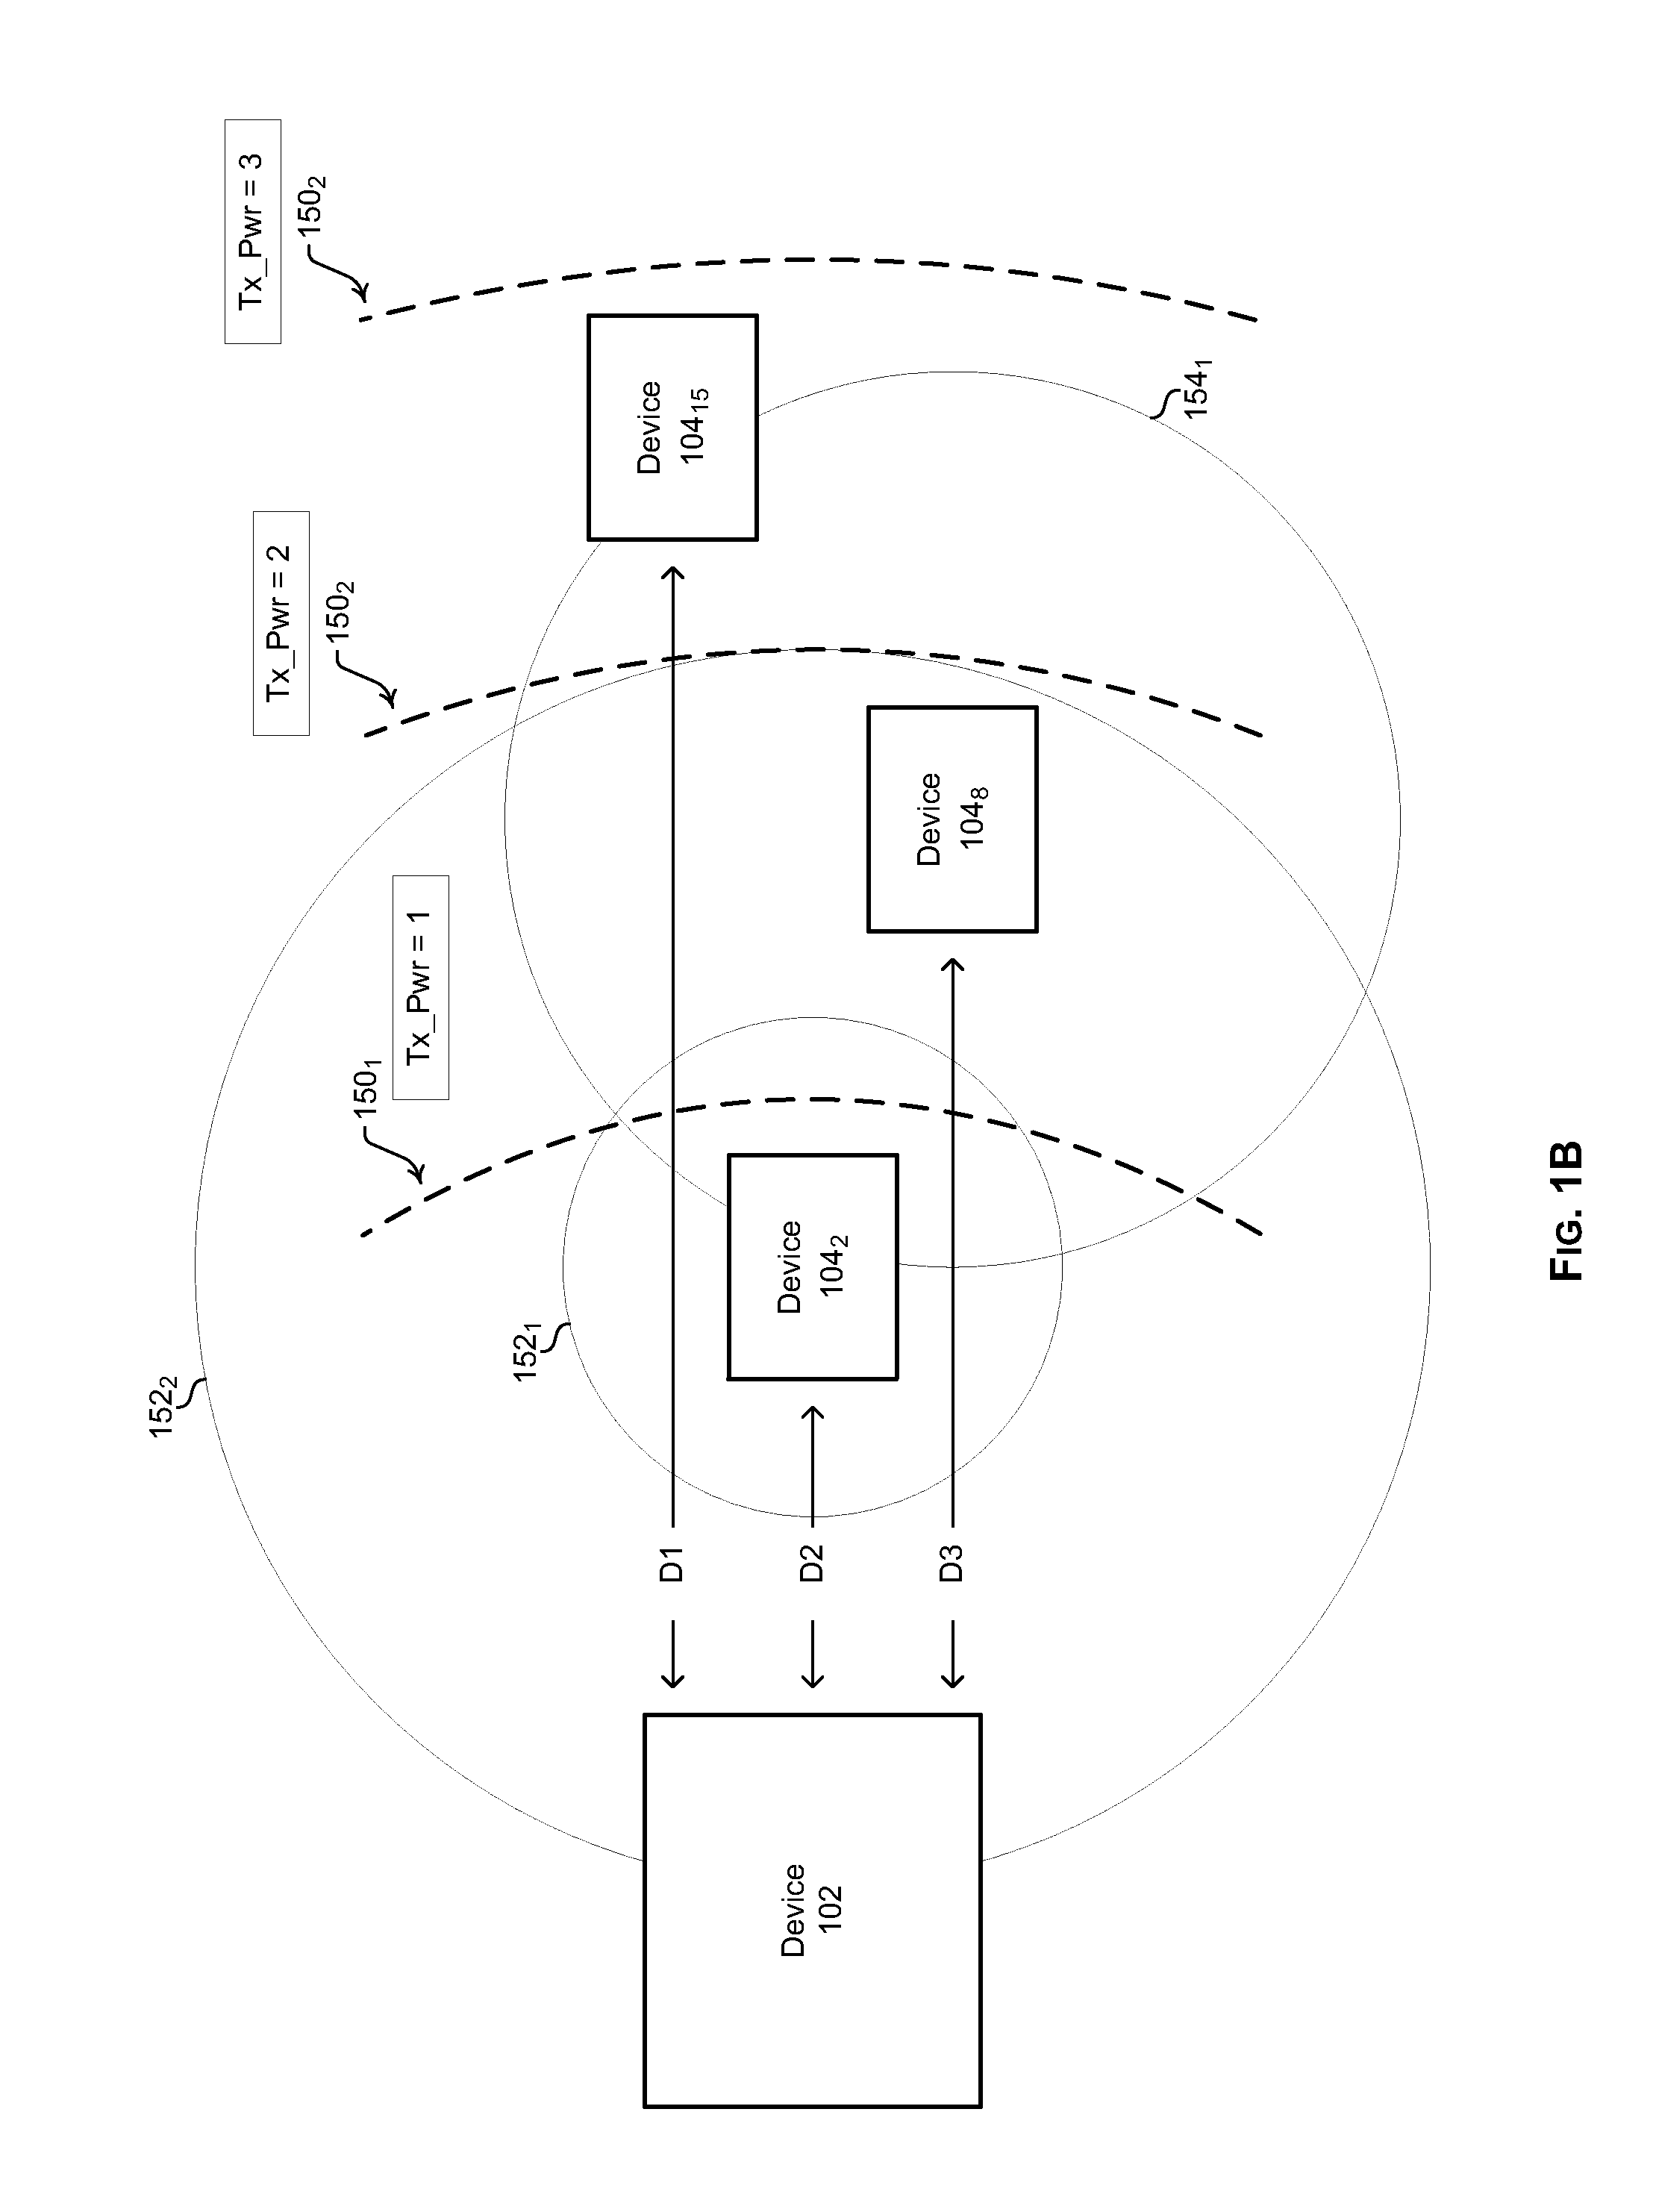 Method and apparatus for power autoscaling in a resource-constrained network